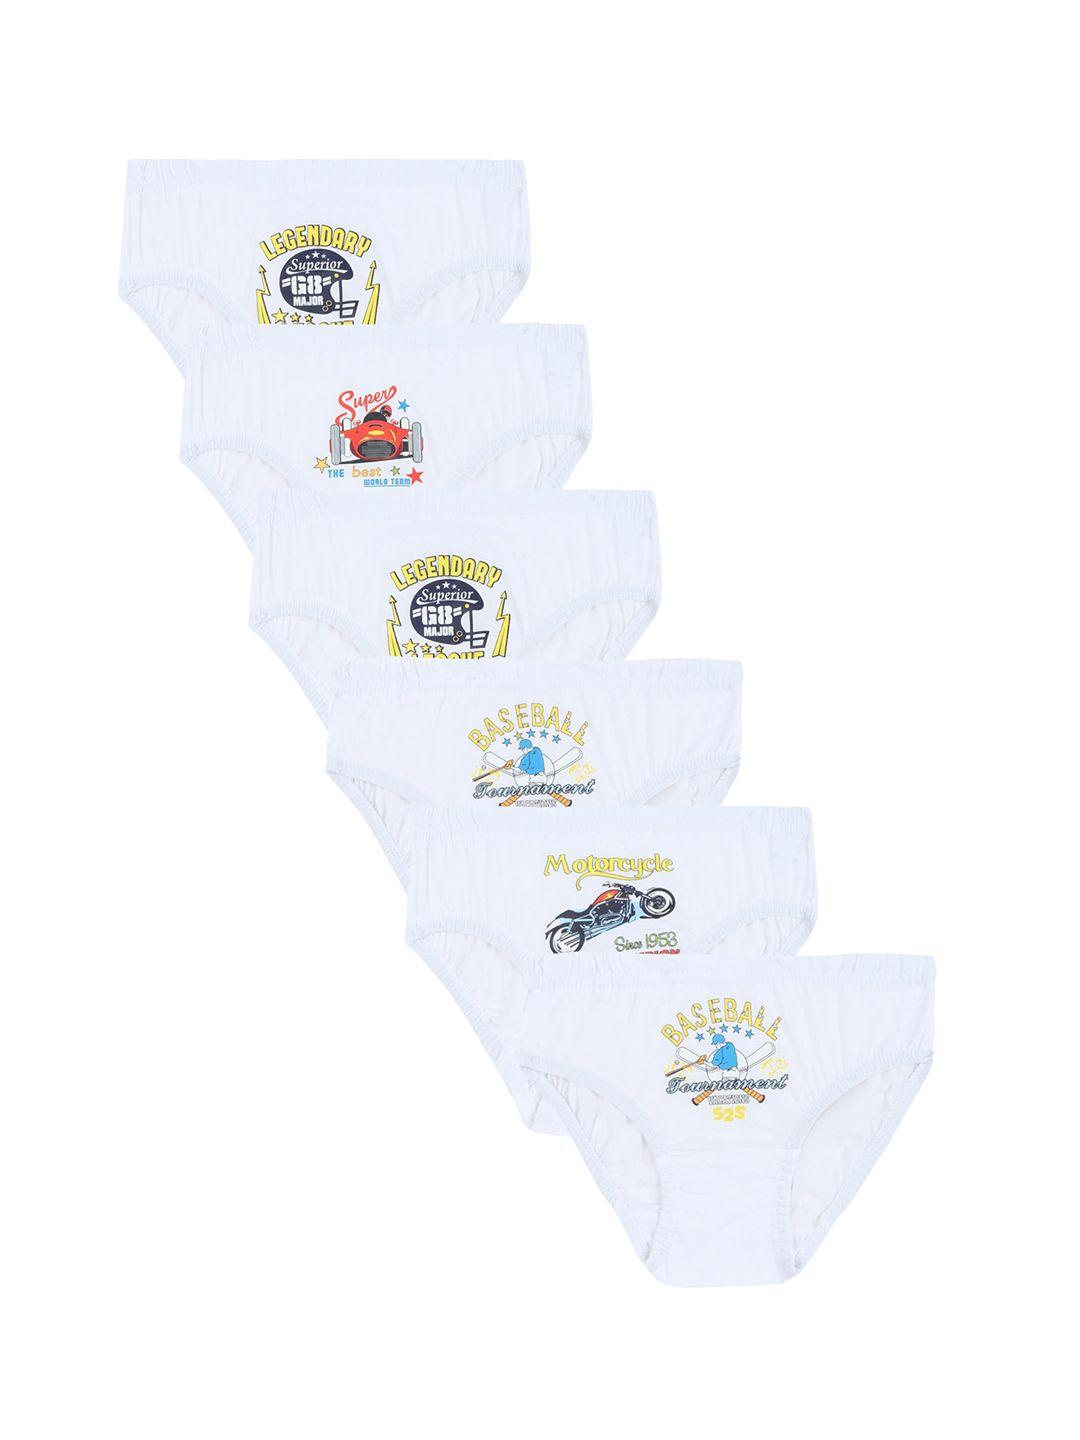 dyca boys  pack of 6 assorted printed cotton briefs